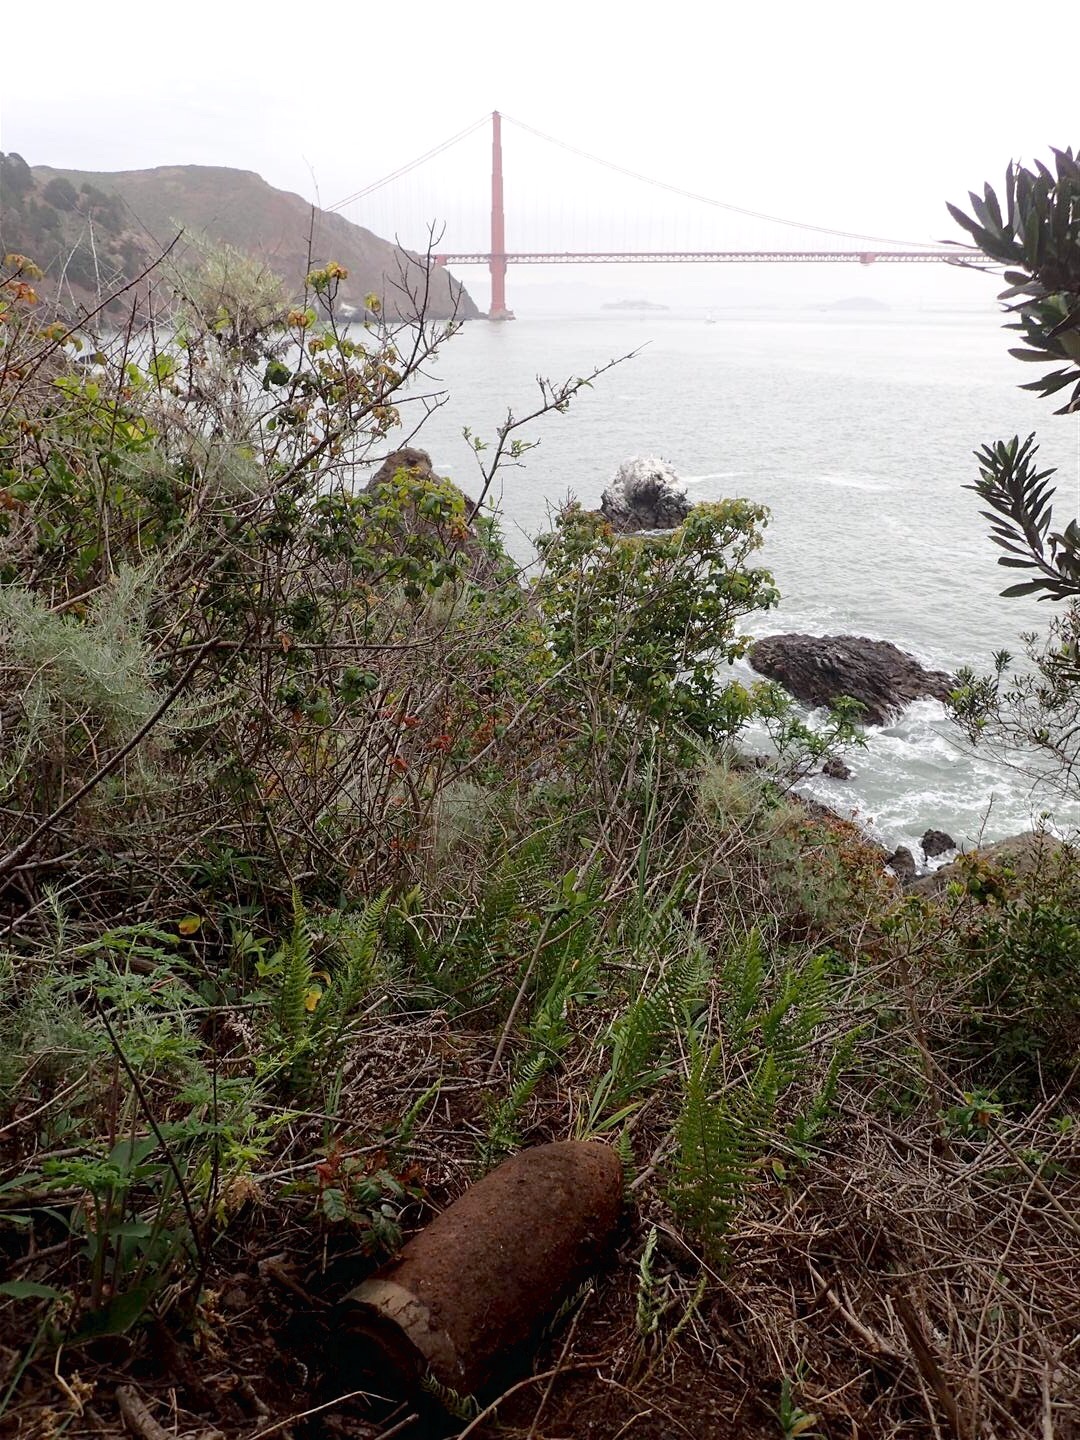 An 1880's projectile found in the Marin Headlands with the Golden Gate Bridge in the background.